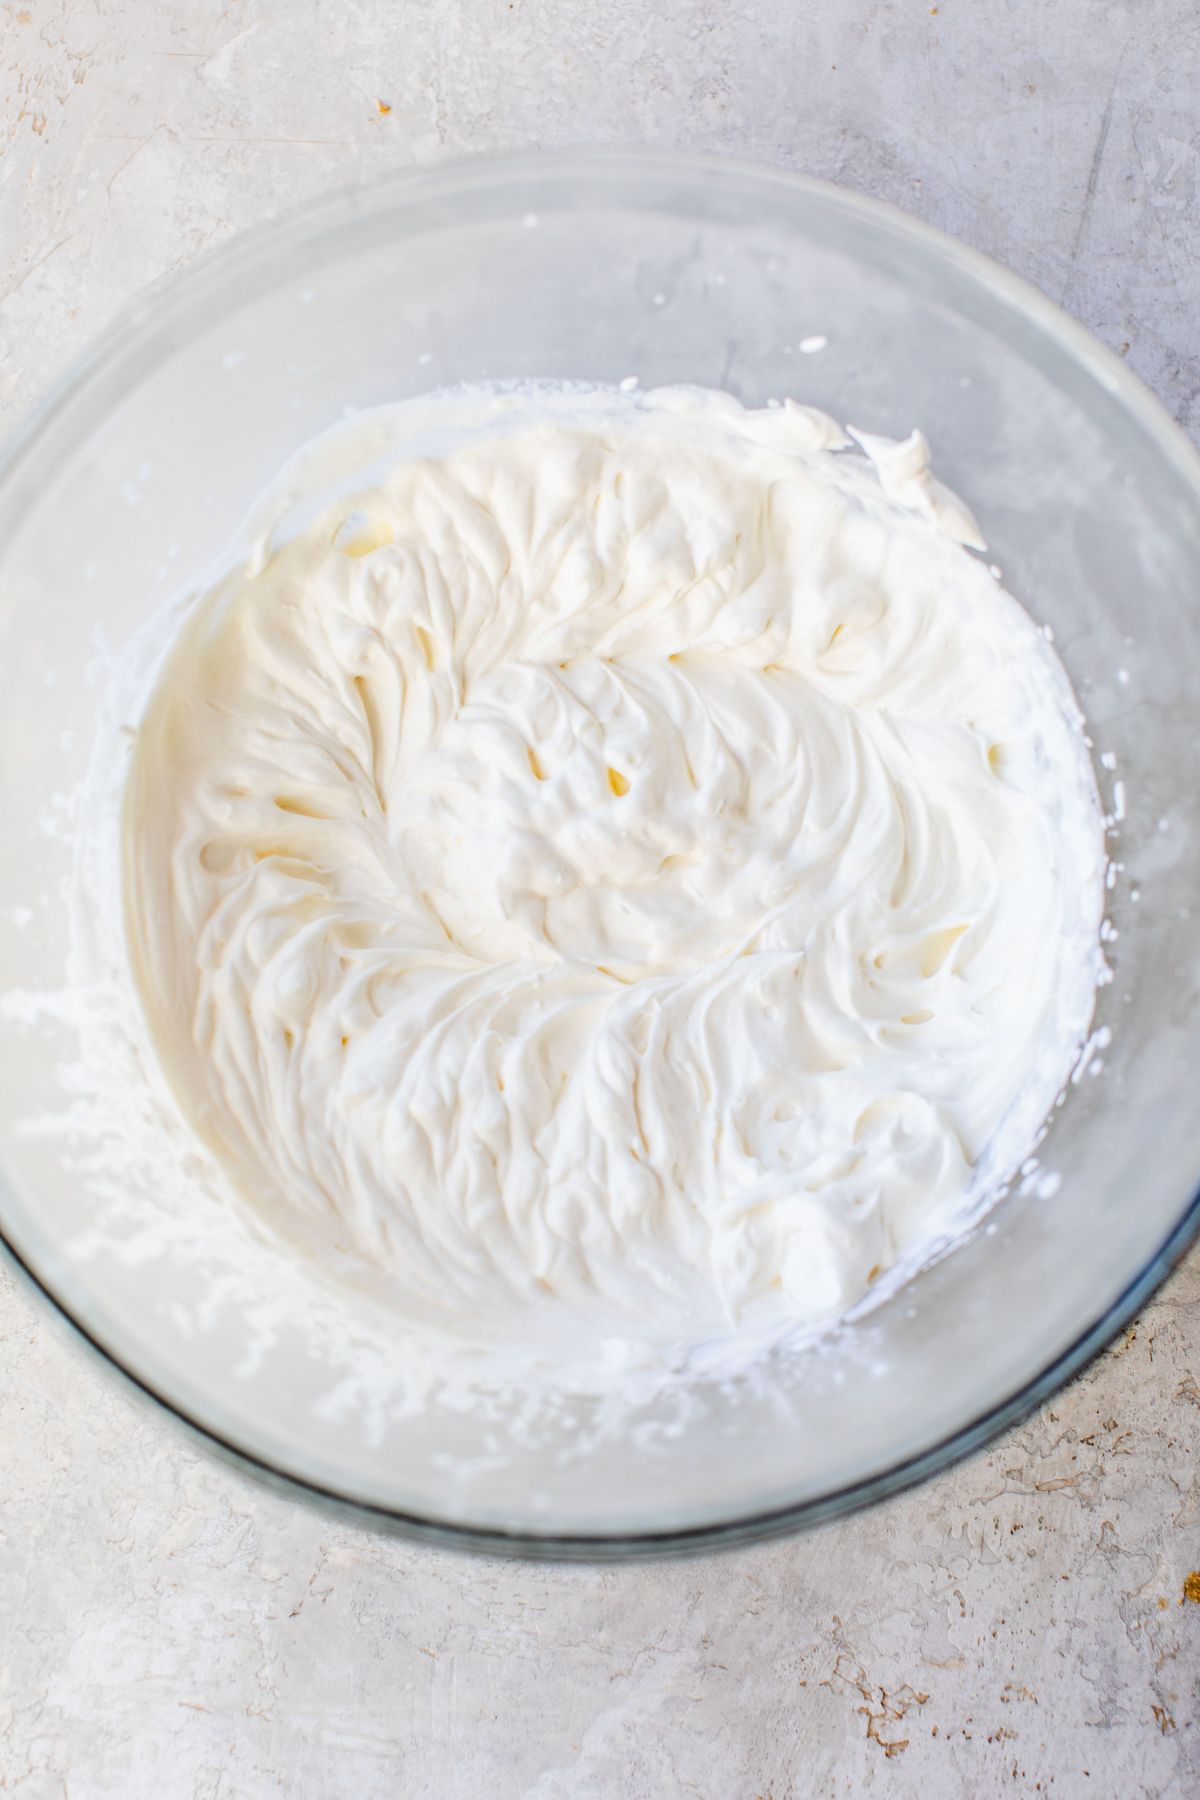 Homemade whipped cream in a large bowl.